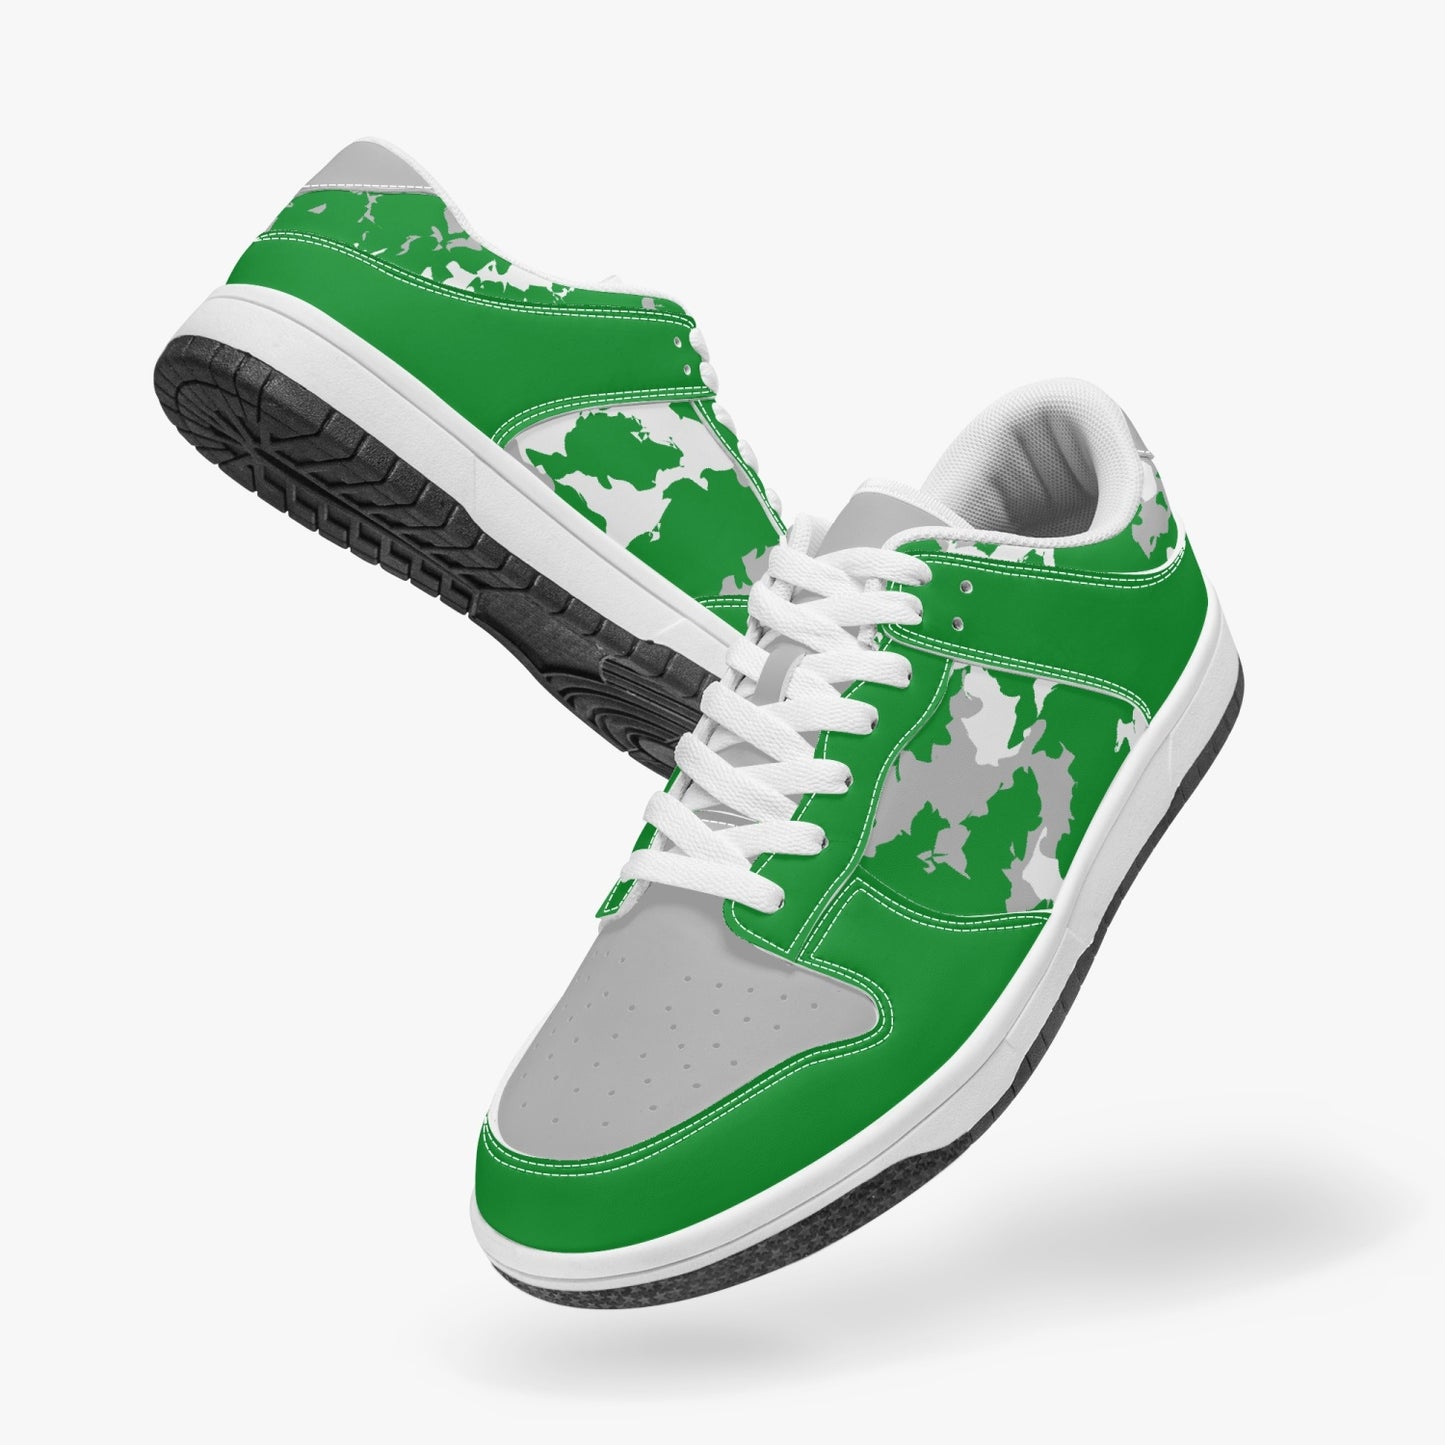 Kicxs Kelly Green Low-Top Leather Sneakers